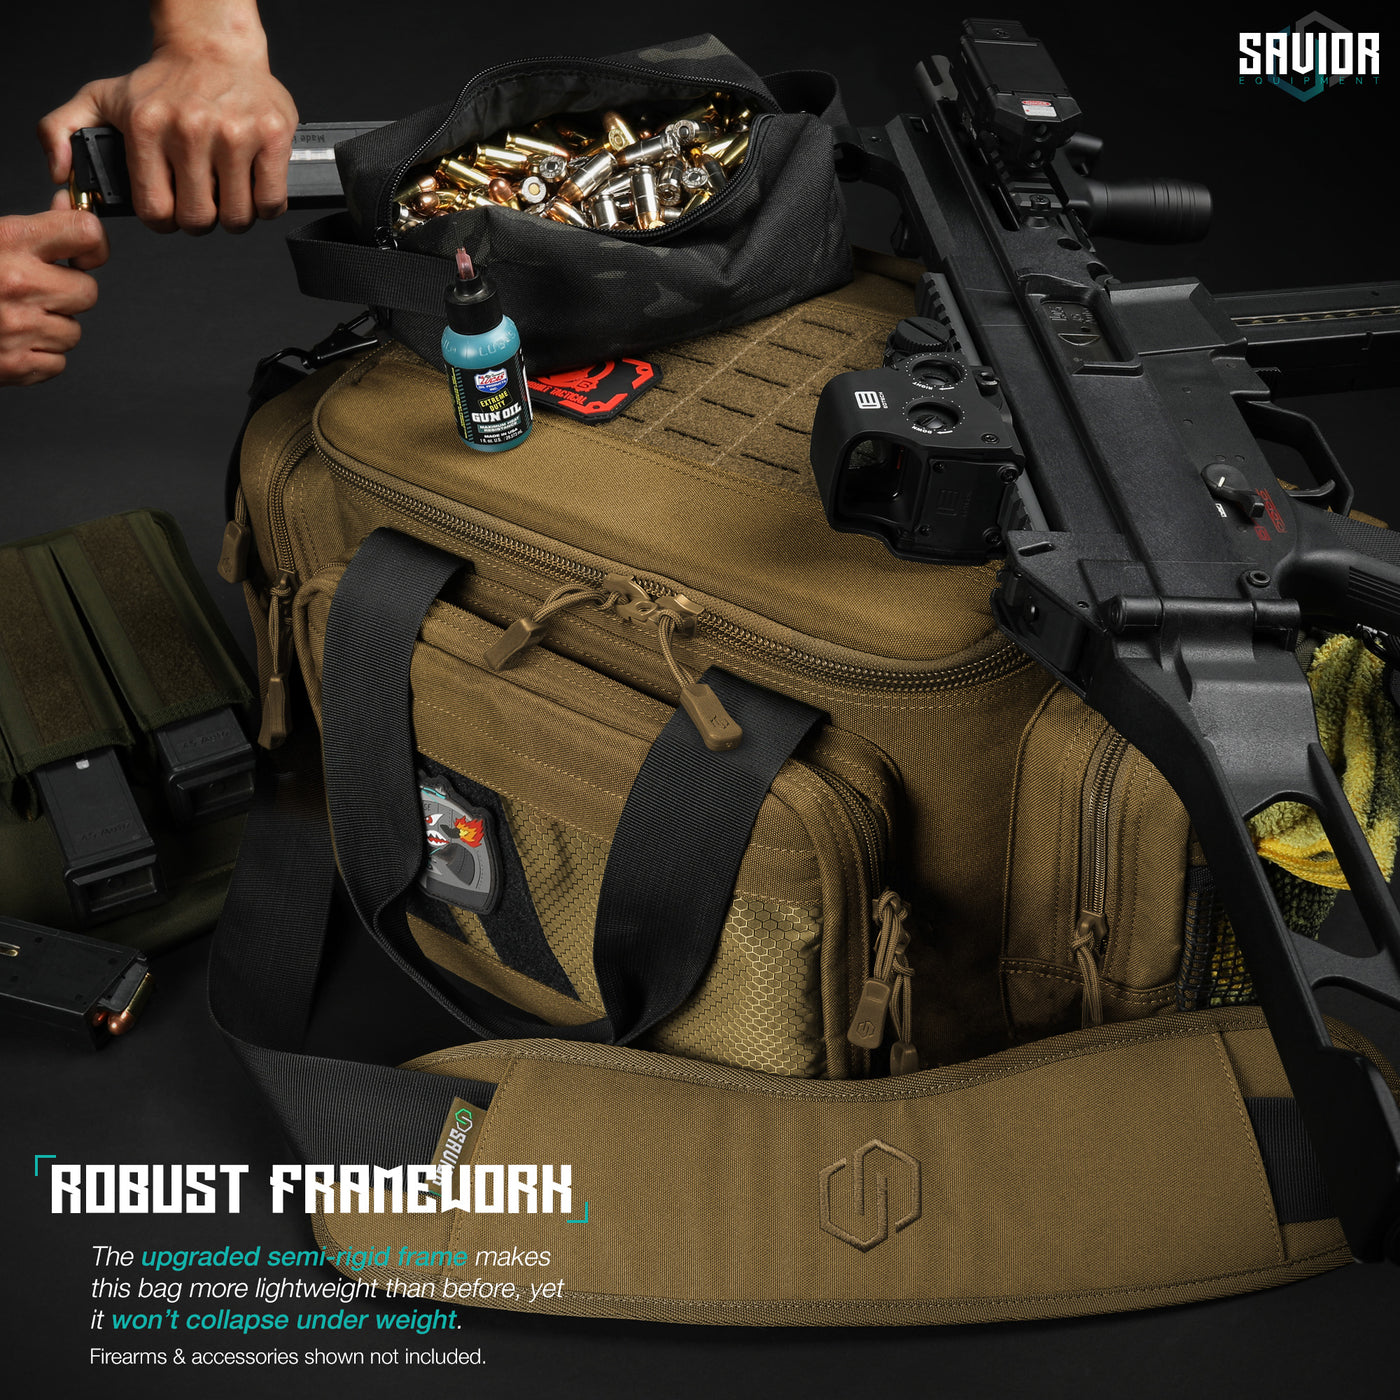 Robust Framework - The upgraded semi-rigid frame makes this bag more lightweight than before, yet it won't collapse under weight. Firearms & accessories shown not included.